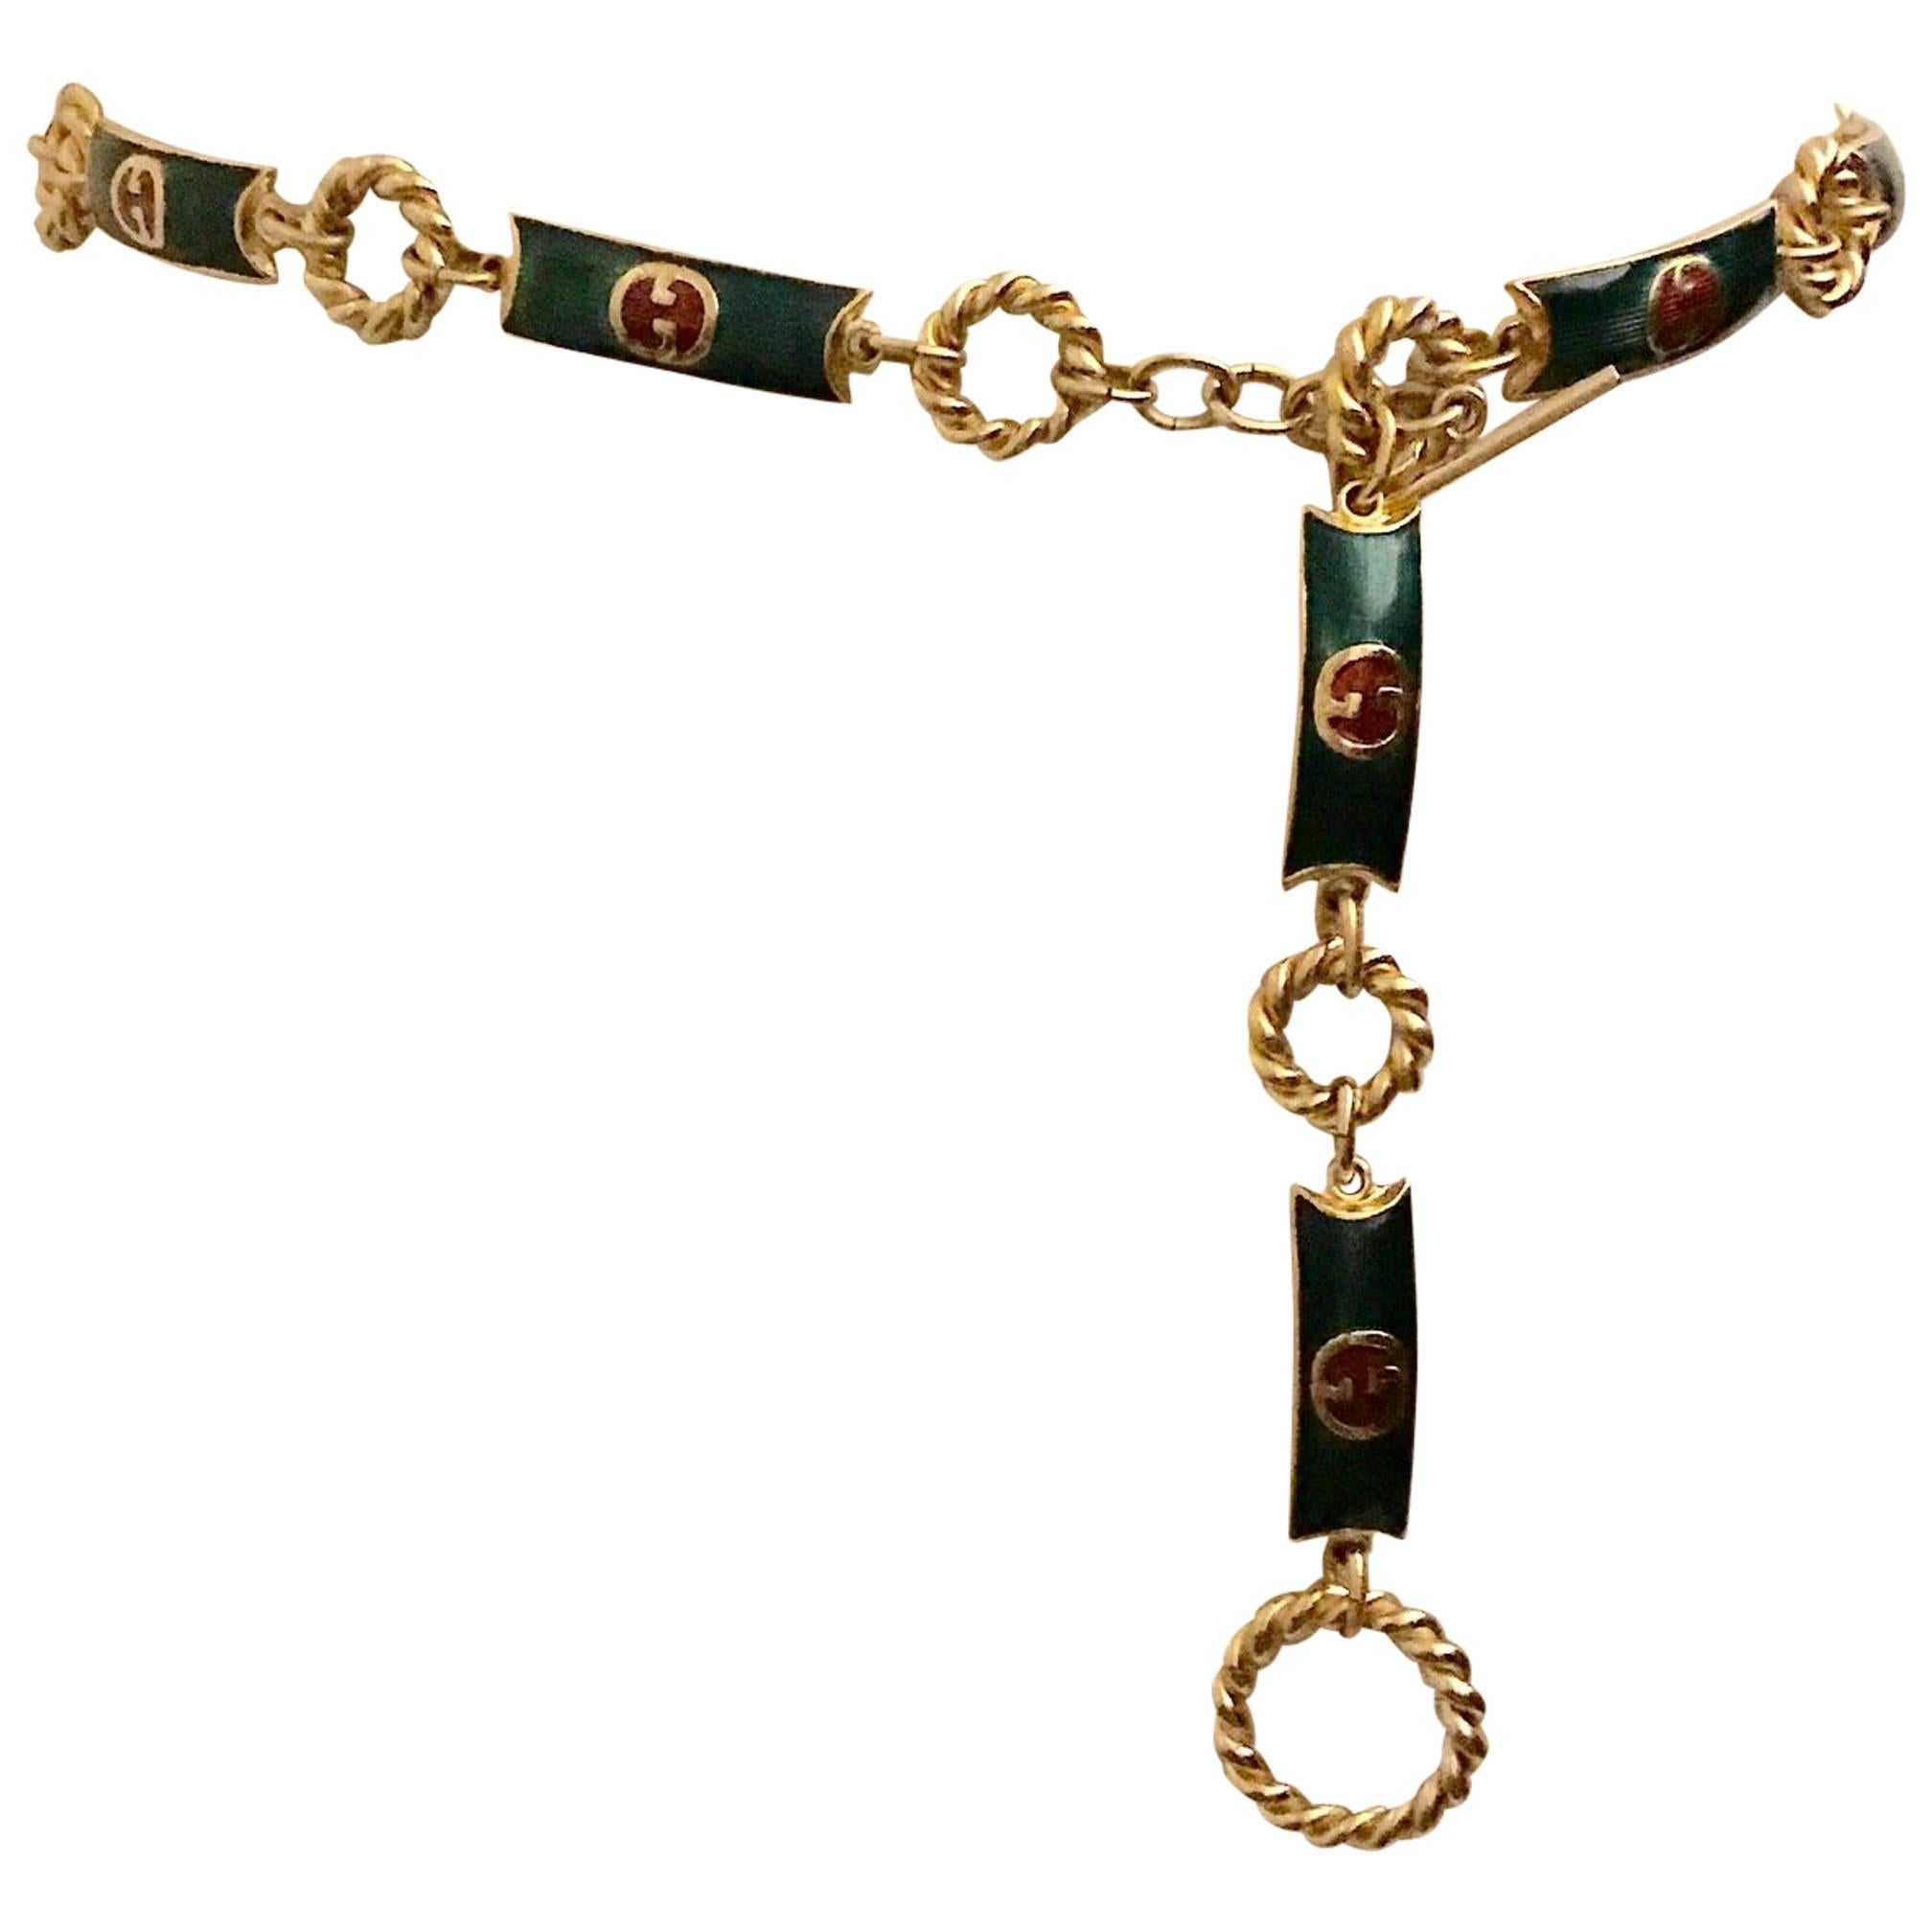 Gucci 1970s GG Logo Green and Red Enamel Gold Chain Toggle Belt or Necklace